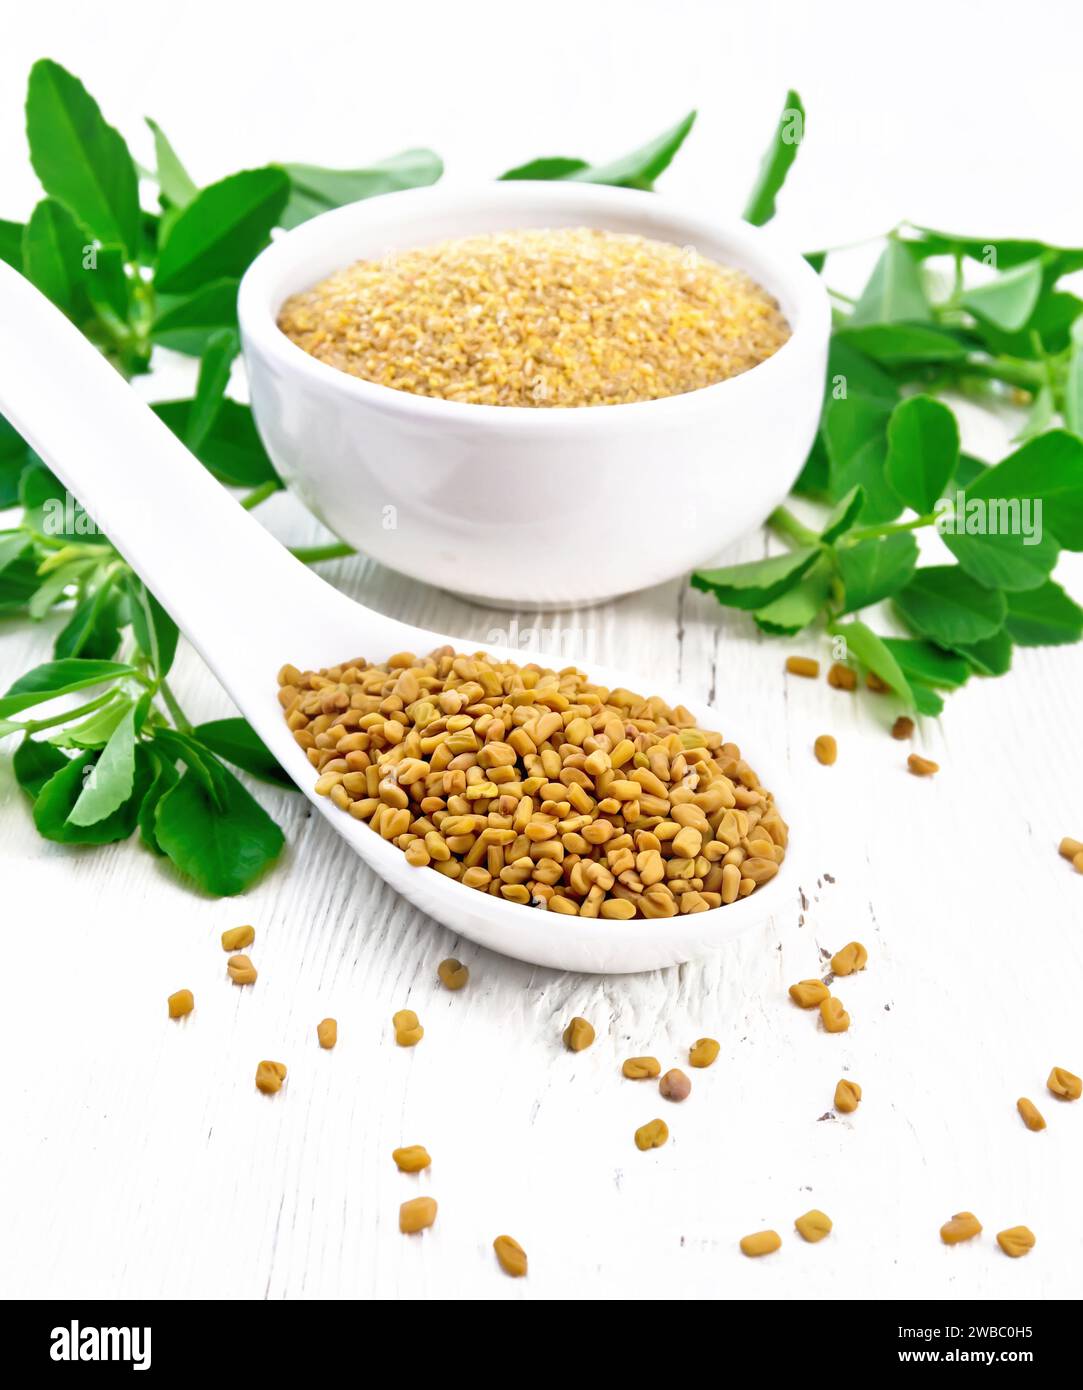 Fenugreek seeds in a spoon and ground spice in a bowl with leaves on background of light wooden board Stock Photo